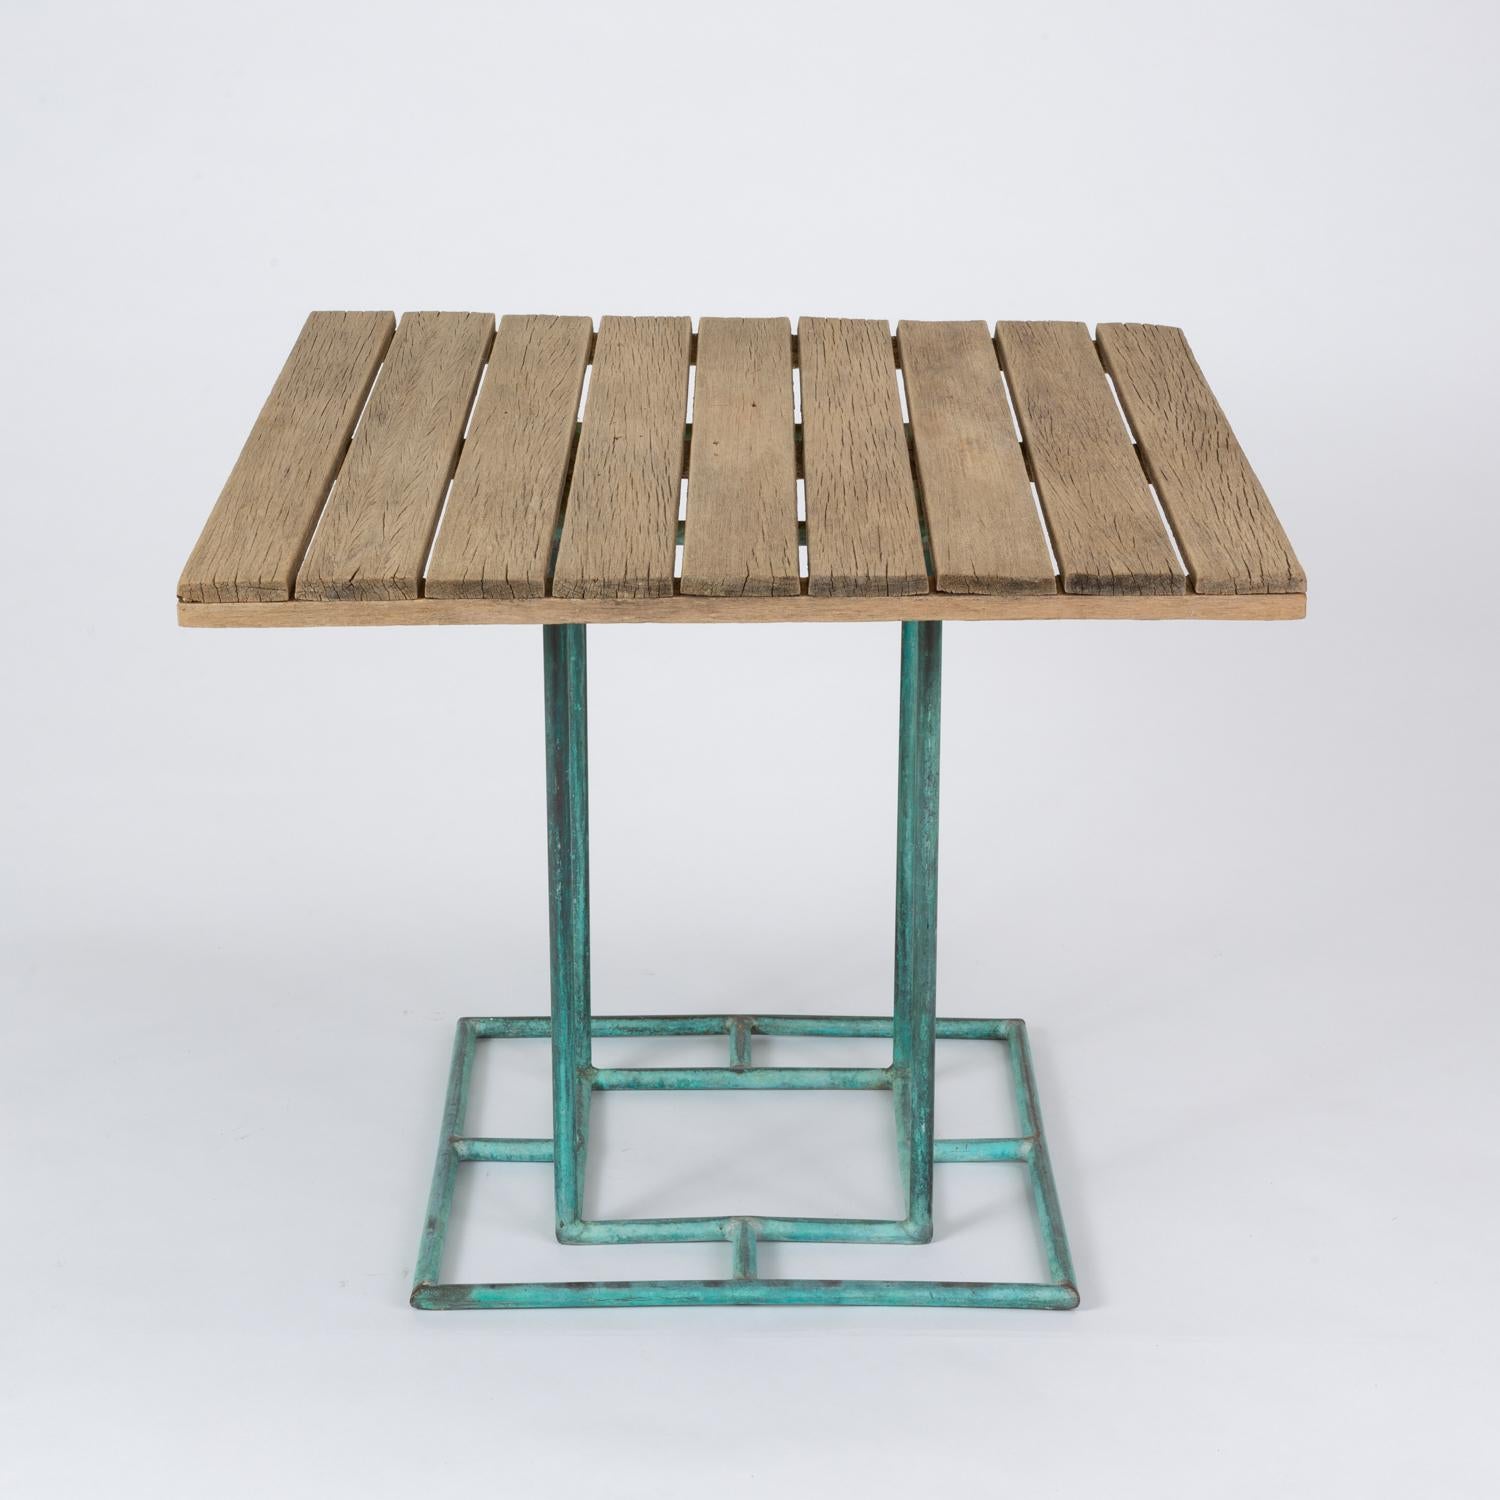 20th Century Bronze Patio Dining Table with Square Wooden Top by Walter Lamb for Brown Jordan